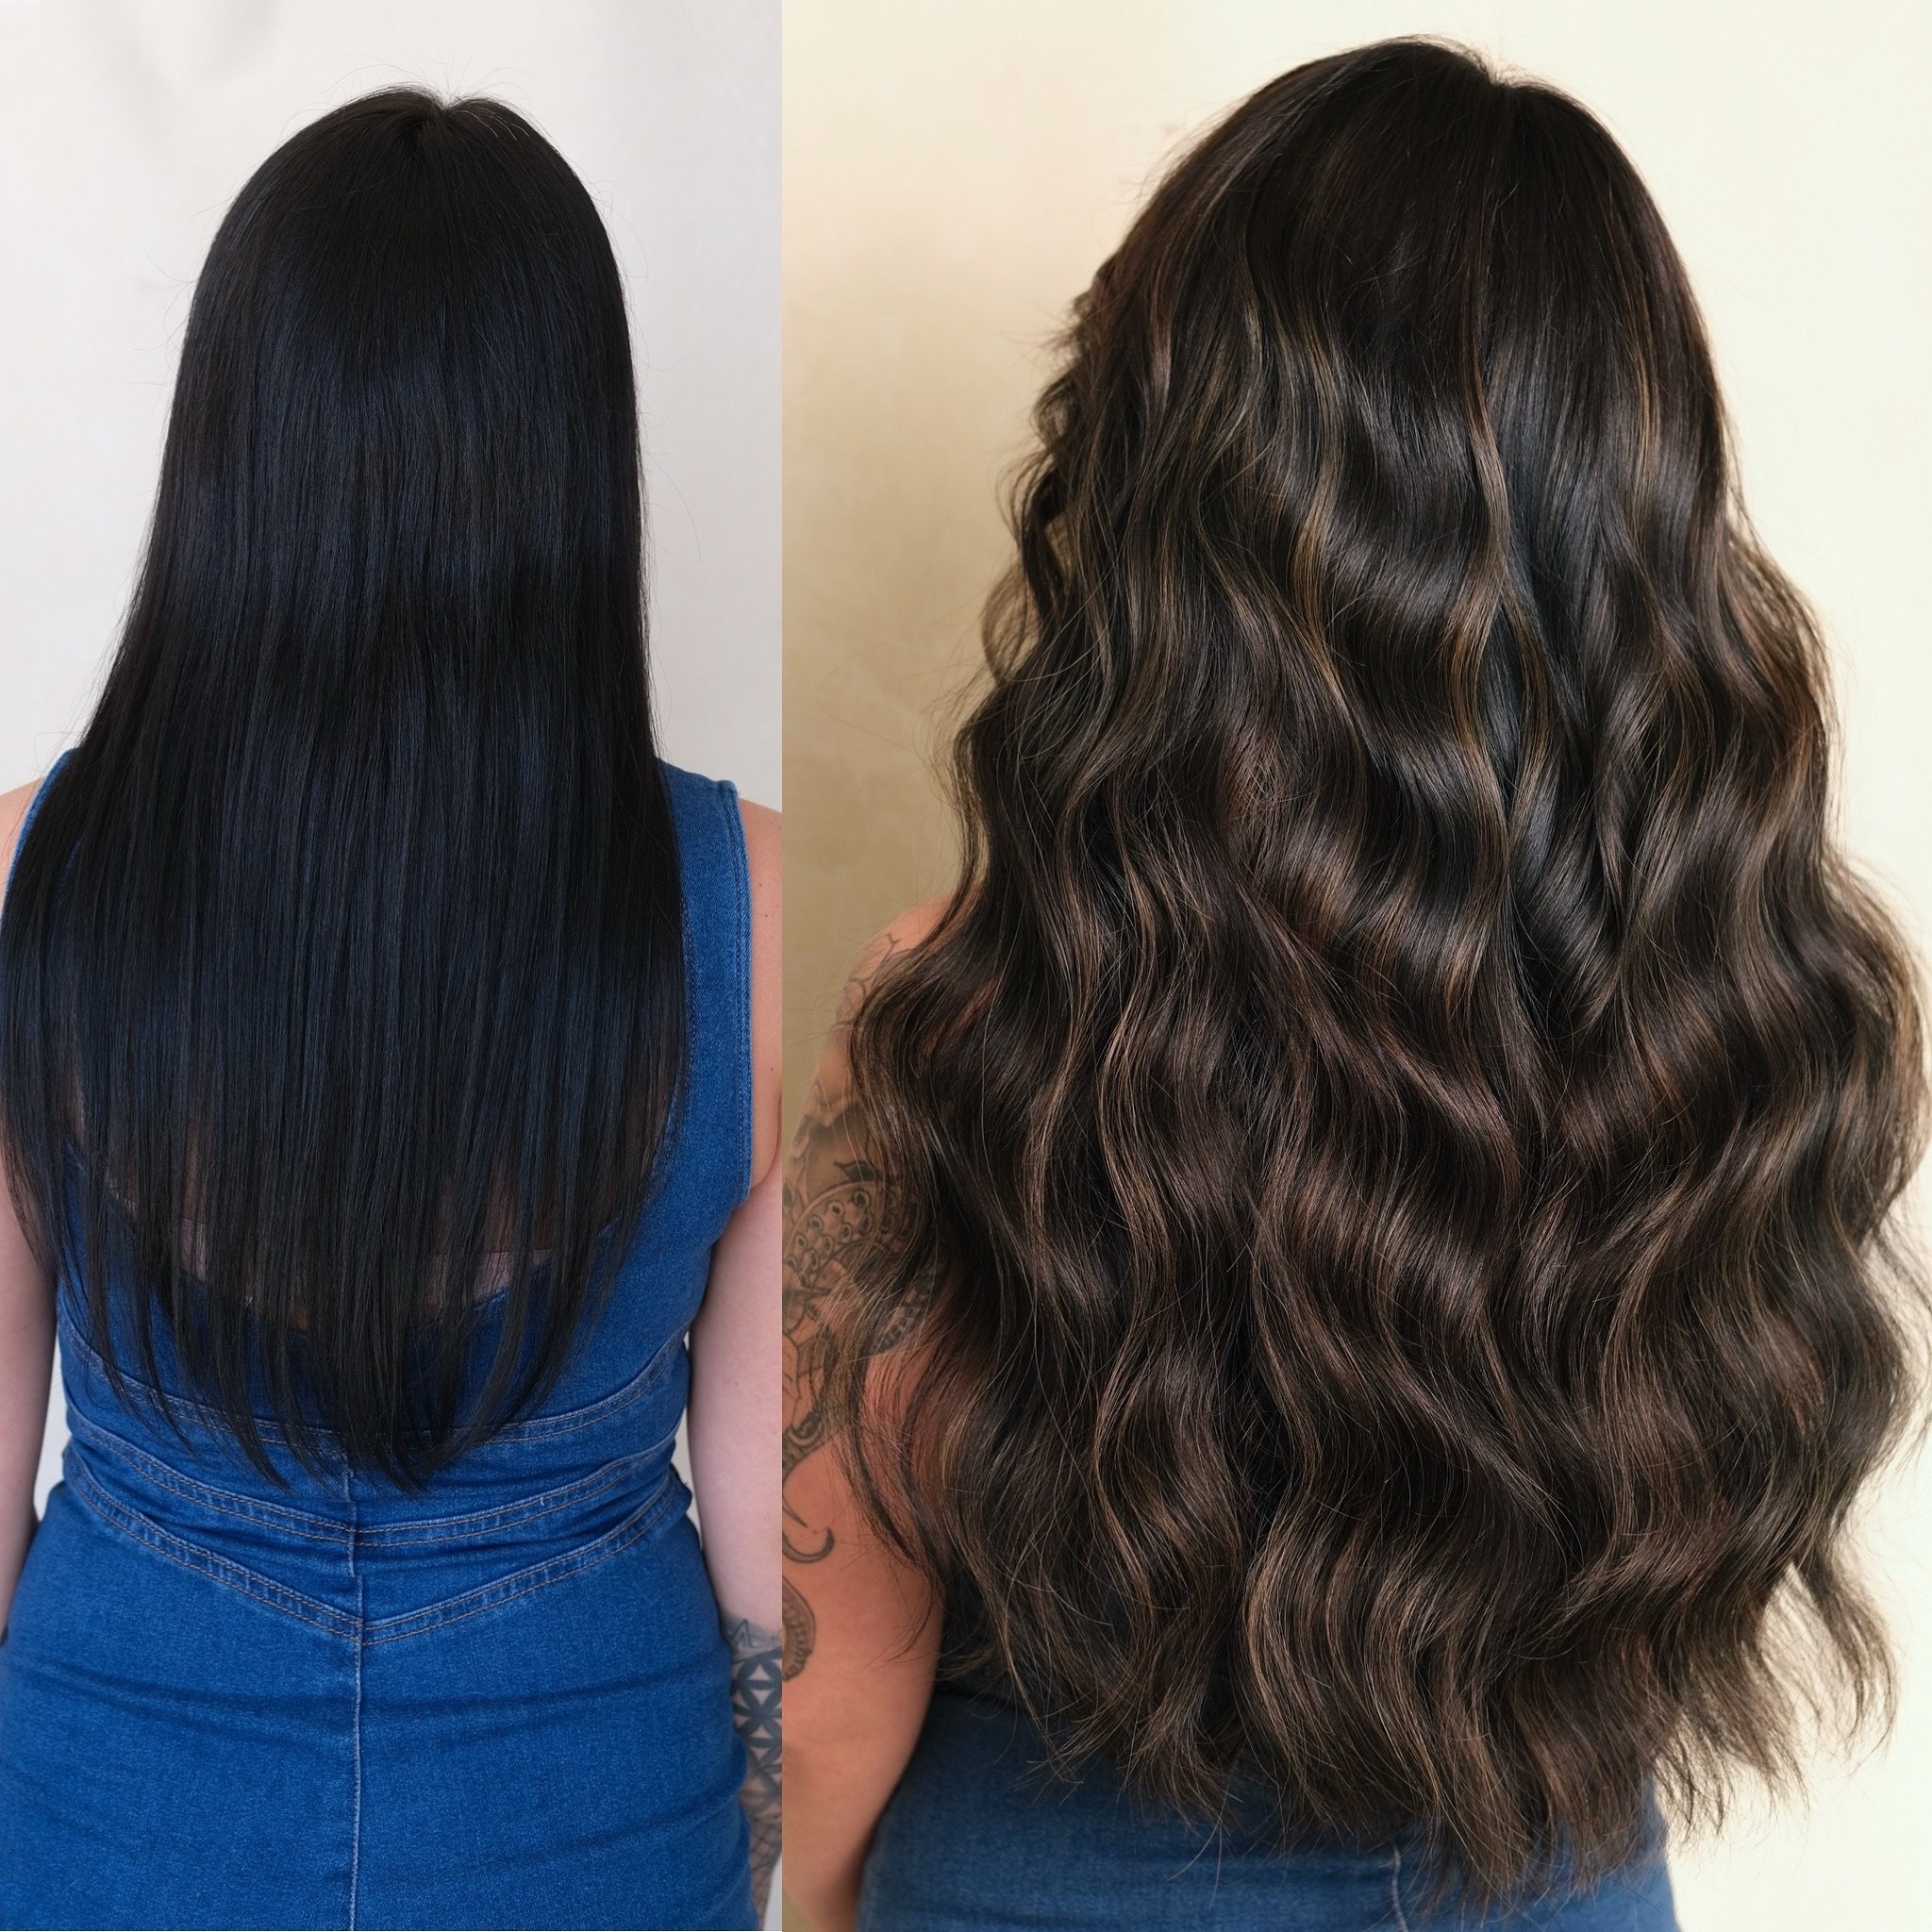 &ldquo;Extensions that look seamlessly natural? Yes, please! 💁🏼&zwj;♀️✨ Let&rsquo;s have a real talk about extensions. Most of them scream &lsquo;fake&rsquo; and are far from natural-looking. You can easily spot the difference between the natural h